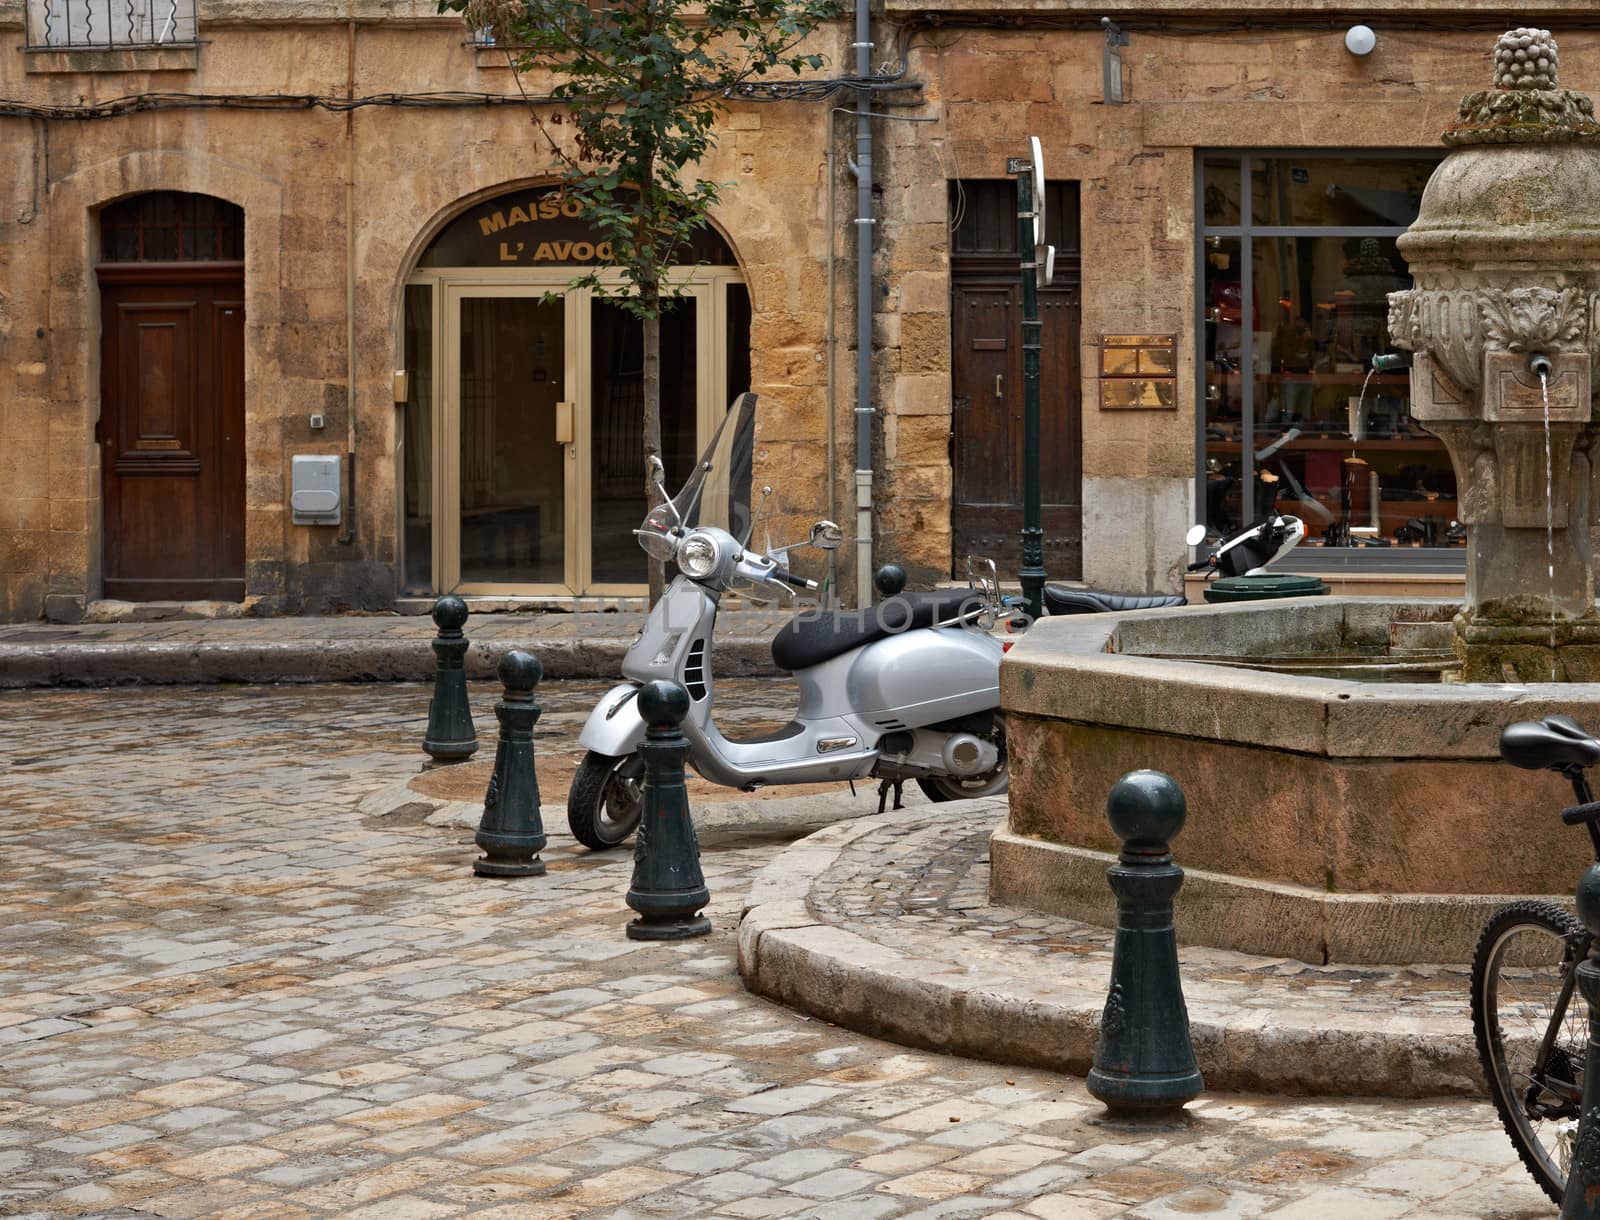 Sunday calmness in Aix en Provence by ecobo